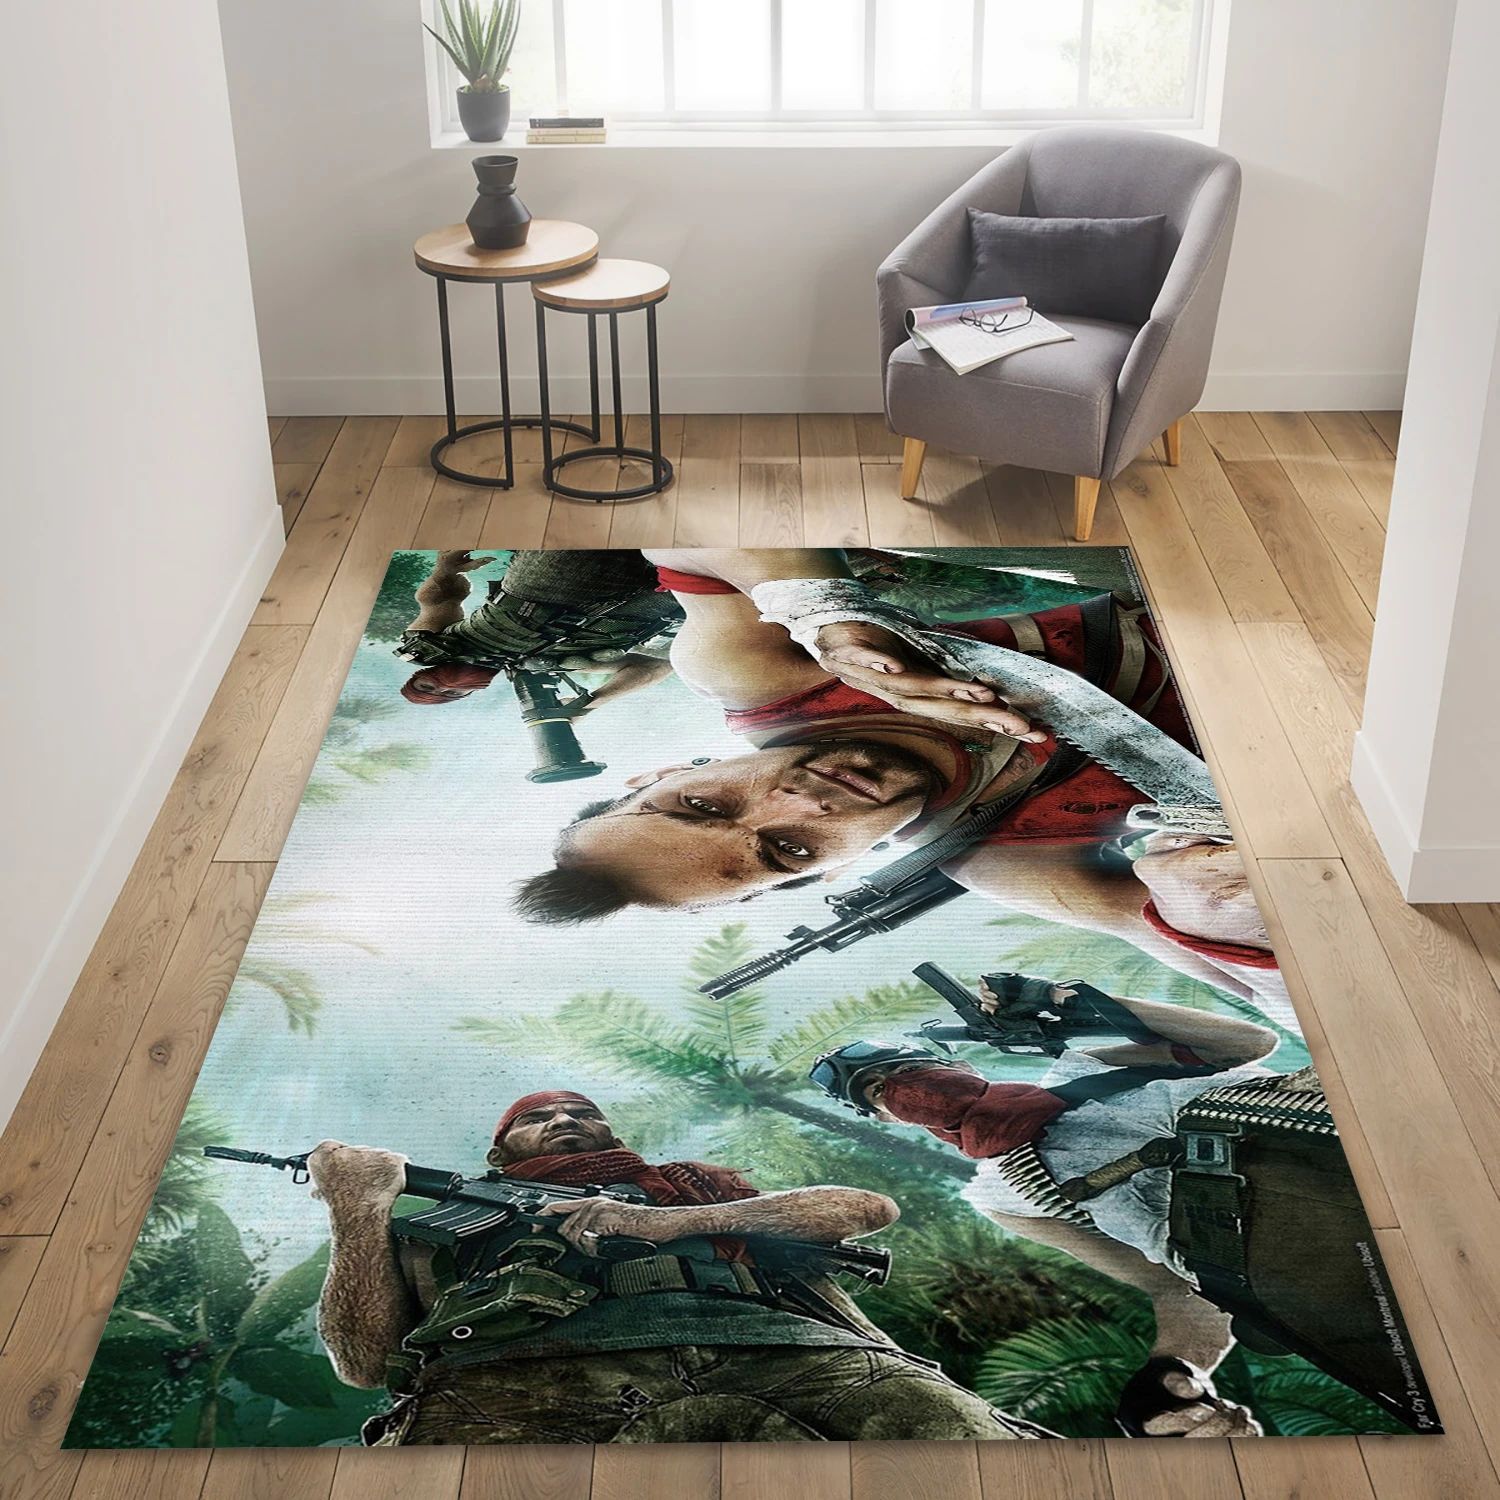 Far Cry 3 Video Game Area Rug For Christmas